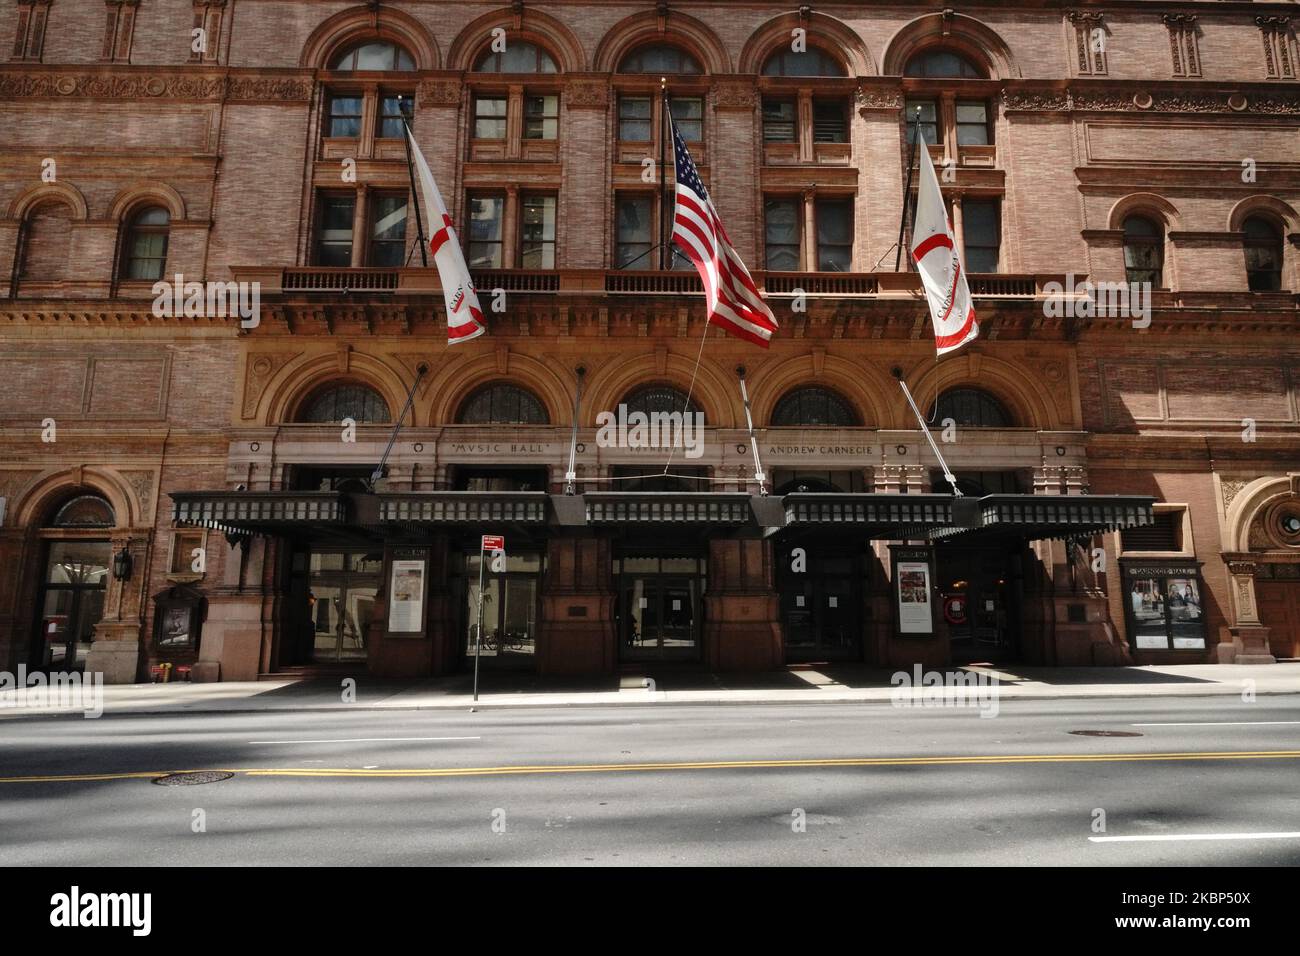 A view of the Carnegie Hall during the coronavirus pandemic on May 20, 2020 in New York City. COVID-19 has spread to most countries around the world, claiming over 316,000 lives with over 4.8 million infections reported. (Photo by John Nacion/NurPhoto) Stock Photo